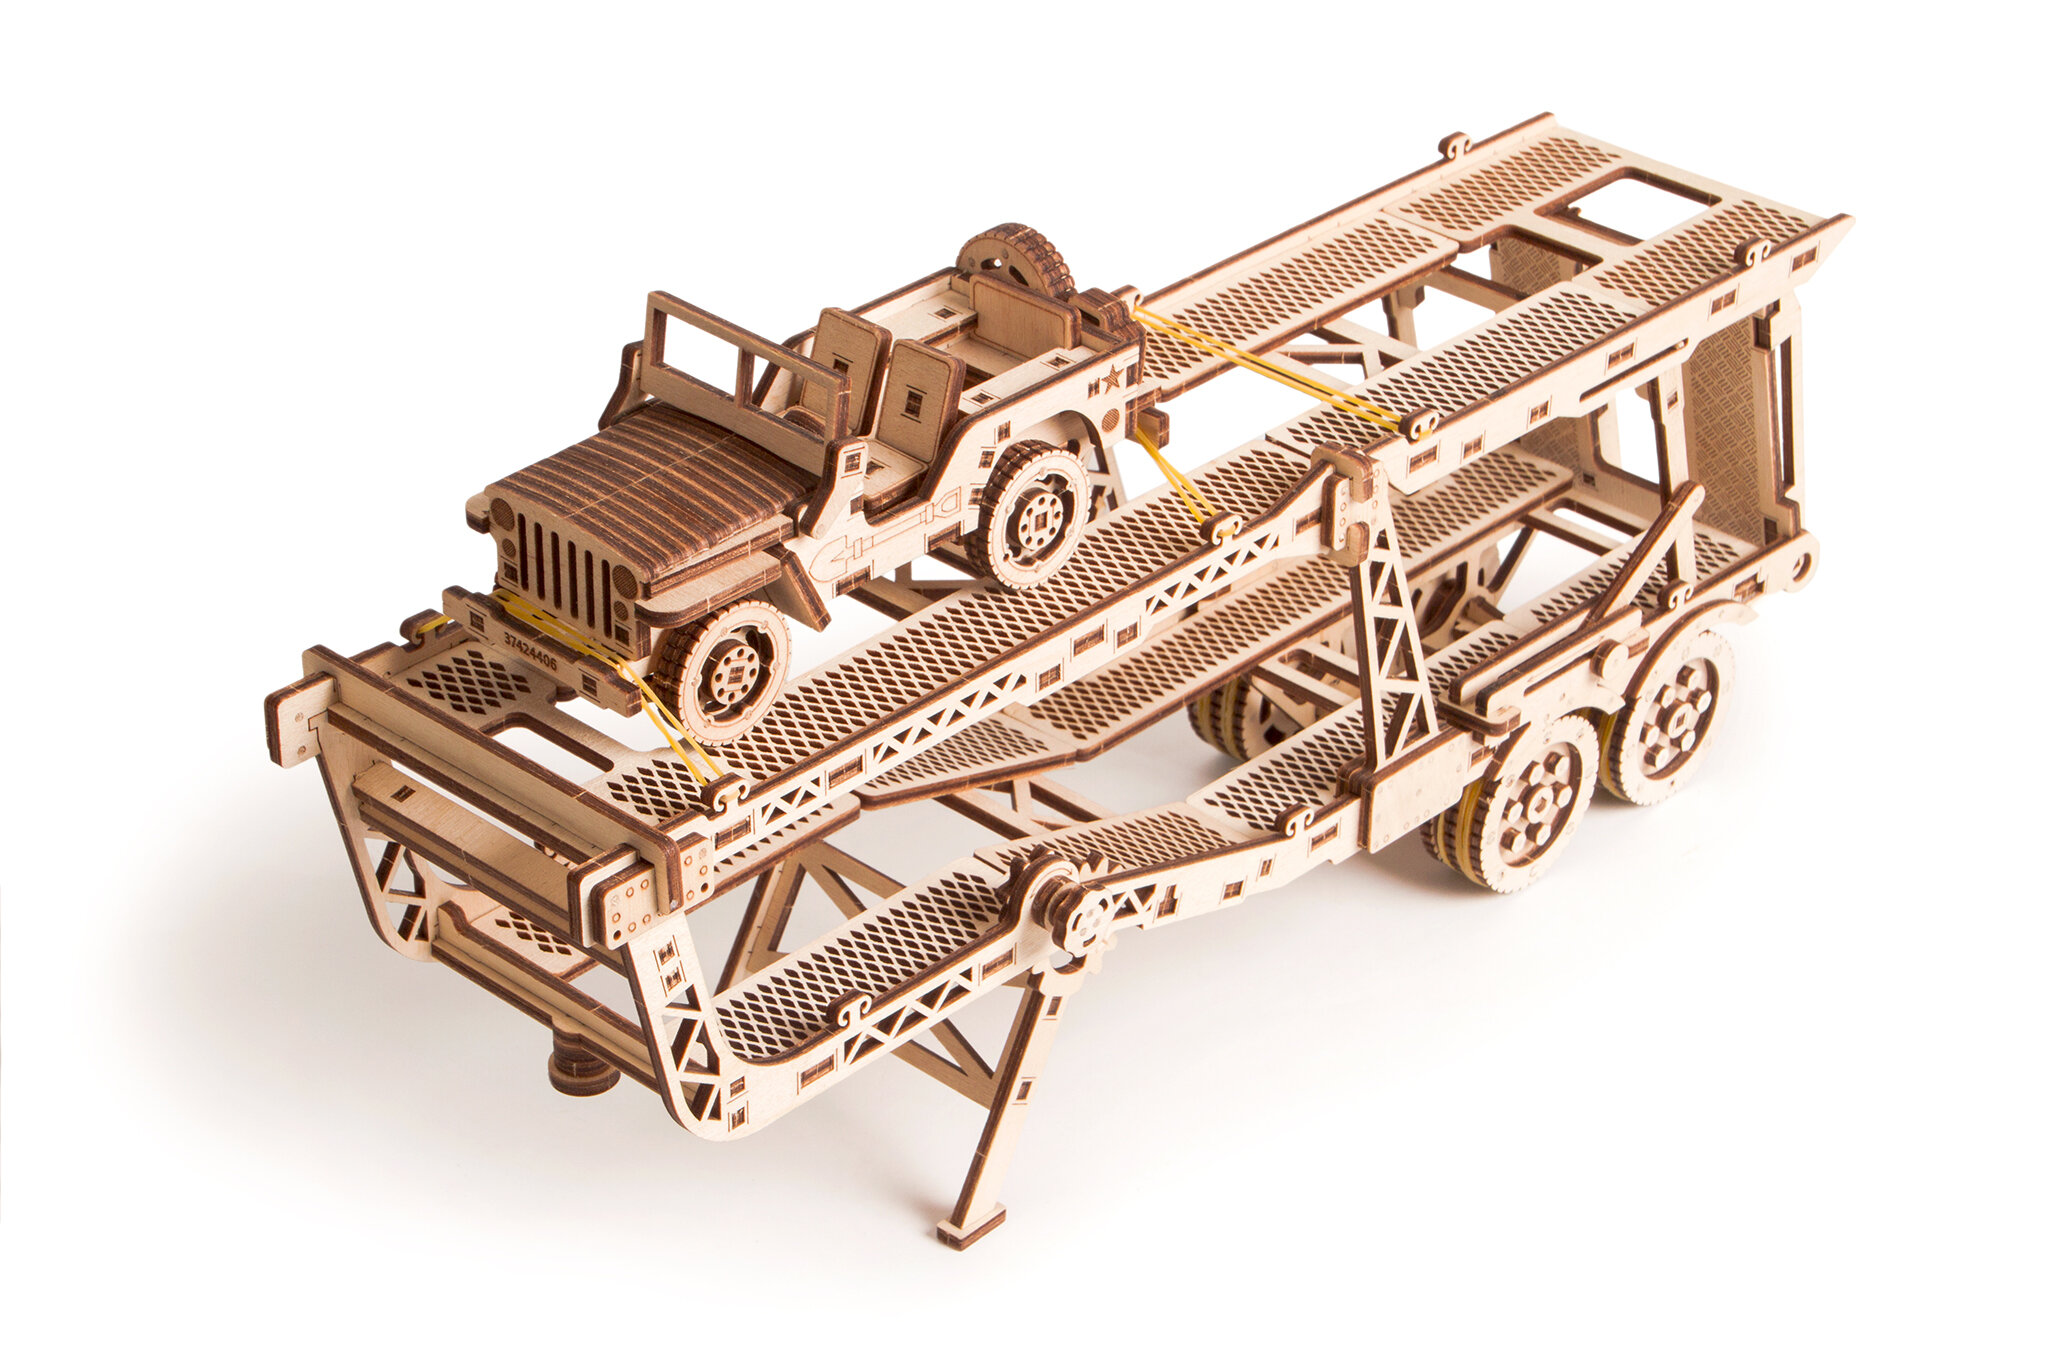 Wood Trick Tank Trailer For Big Rig Mechanical Wooden 3D Puzzle Model Assembly 